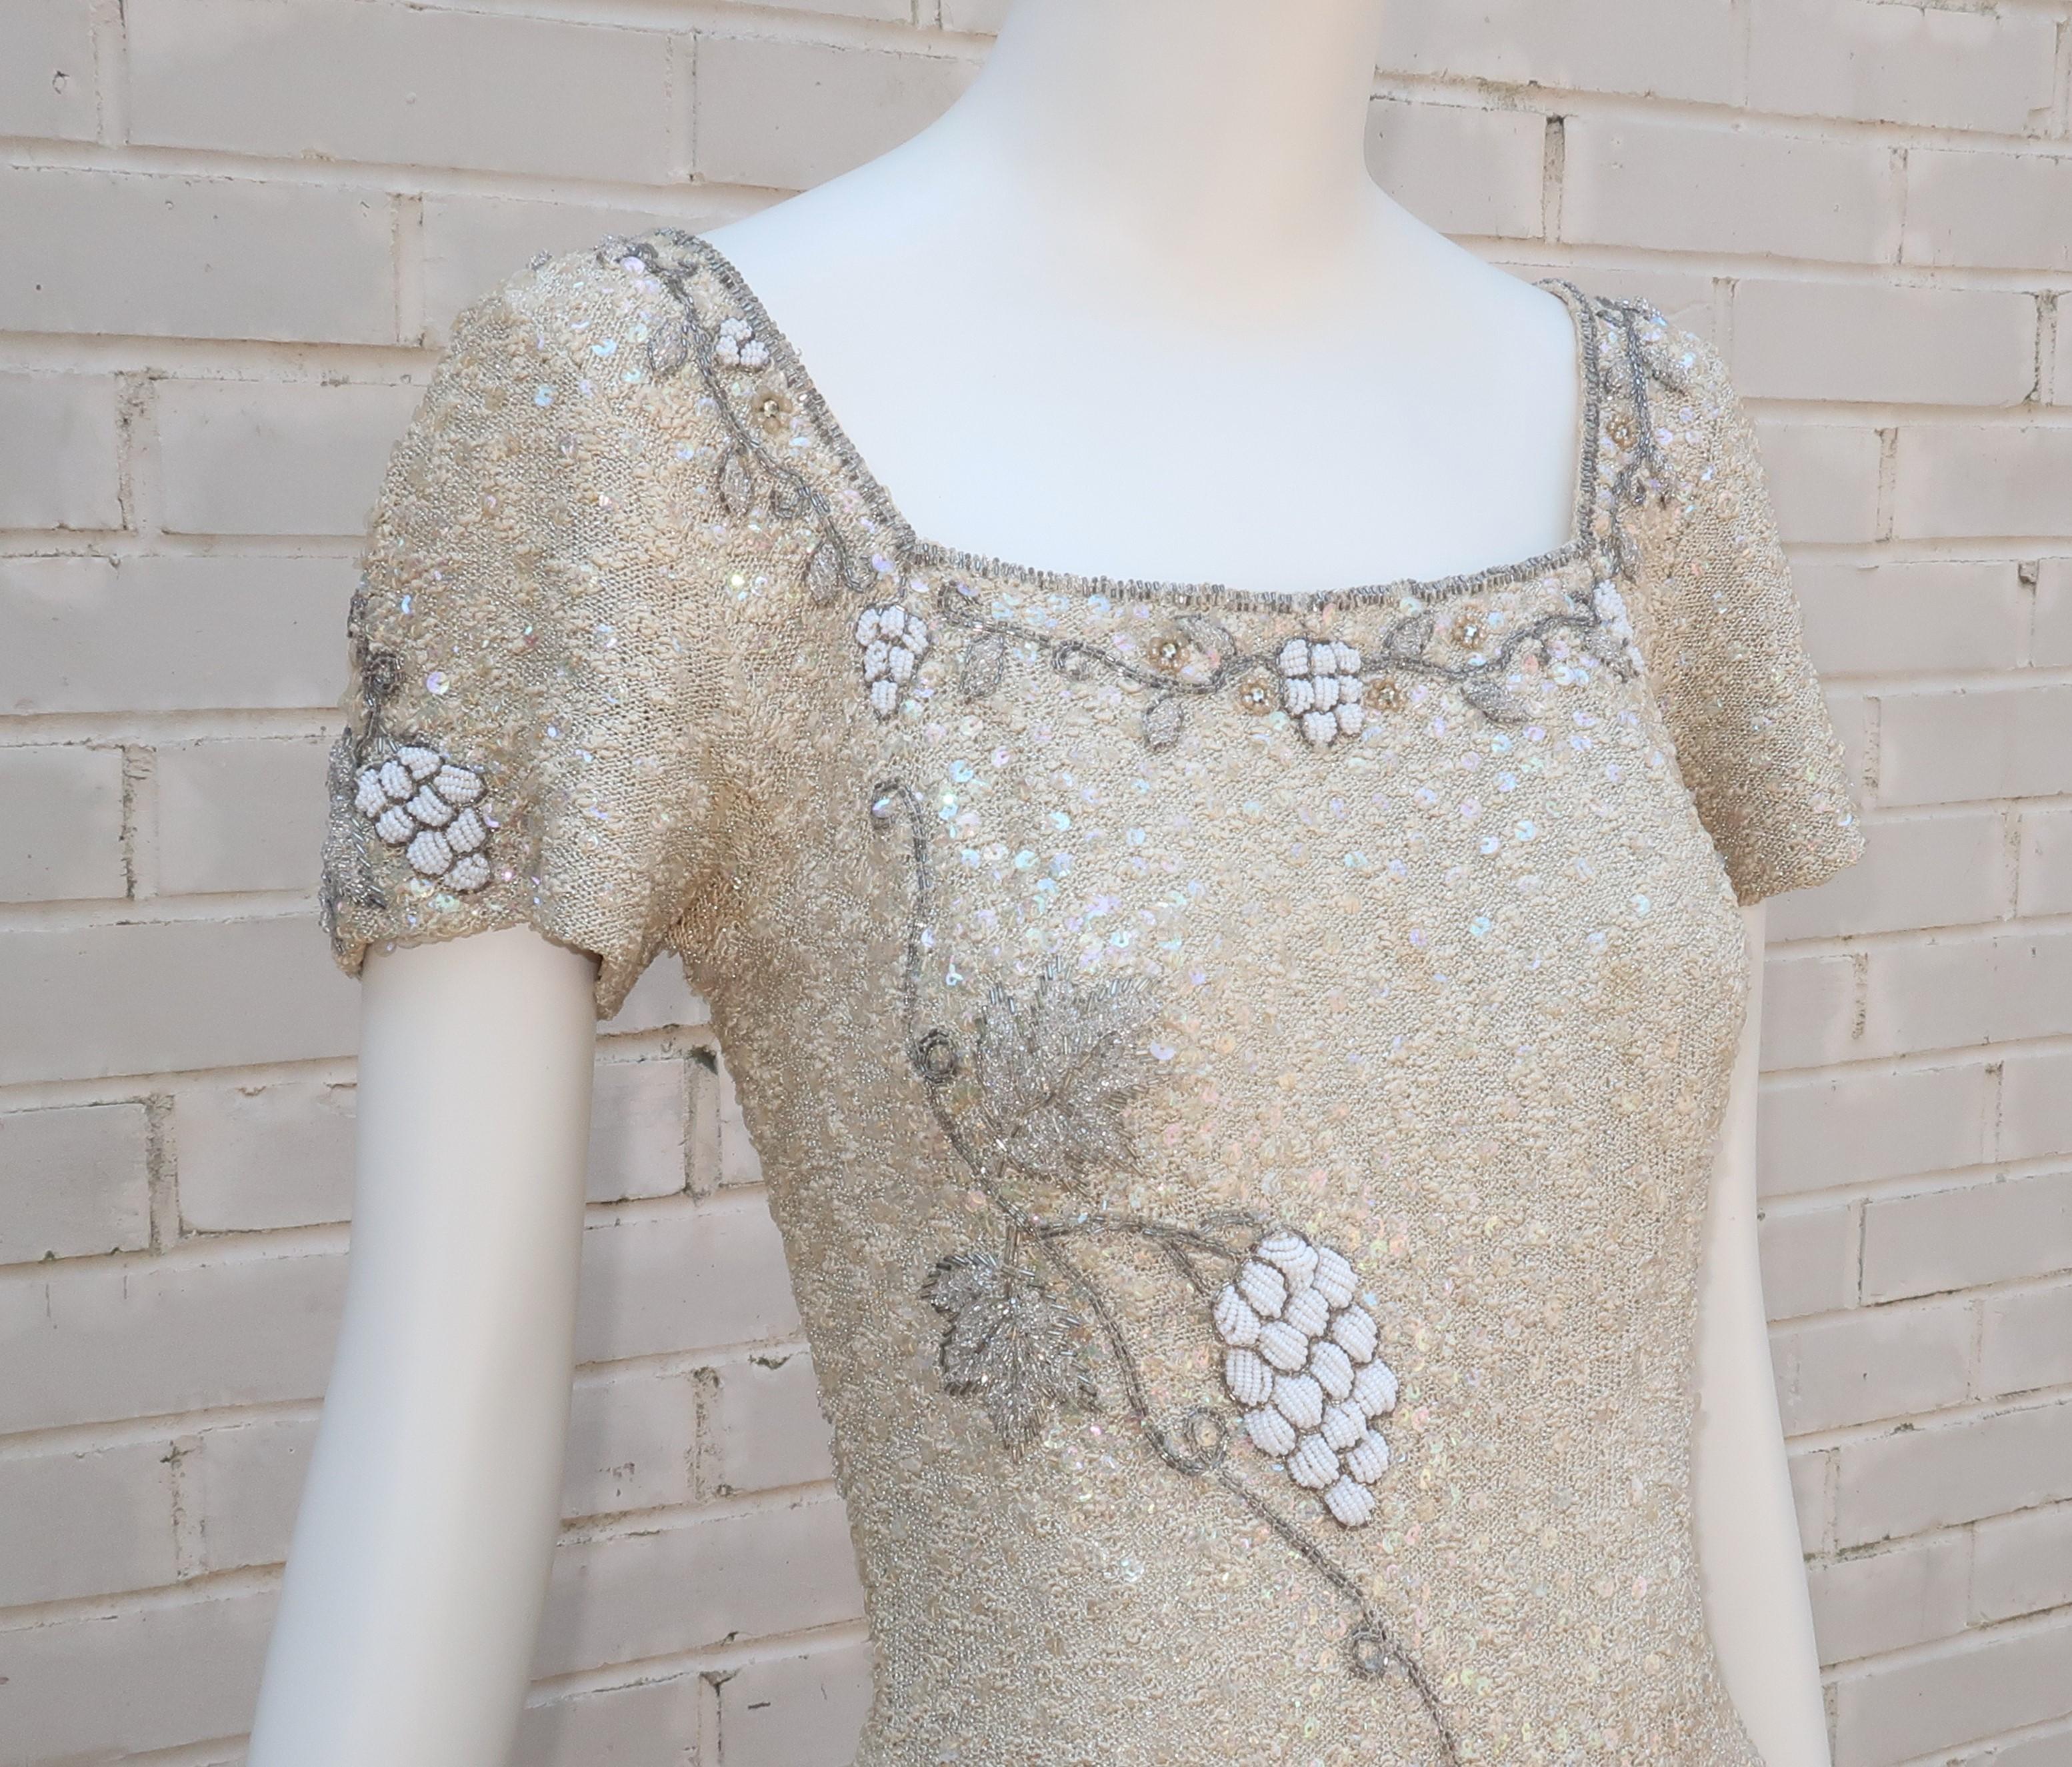 Women's Florence Lustig Beaded Sequin Knit Wiggle Dress, 1950's